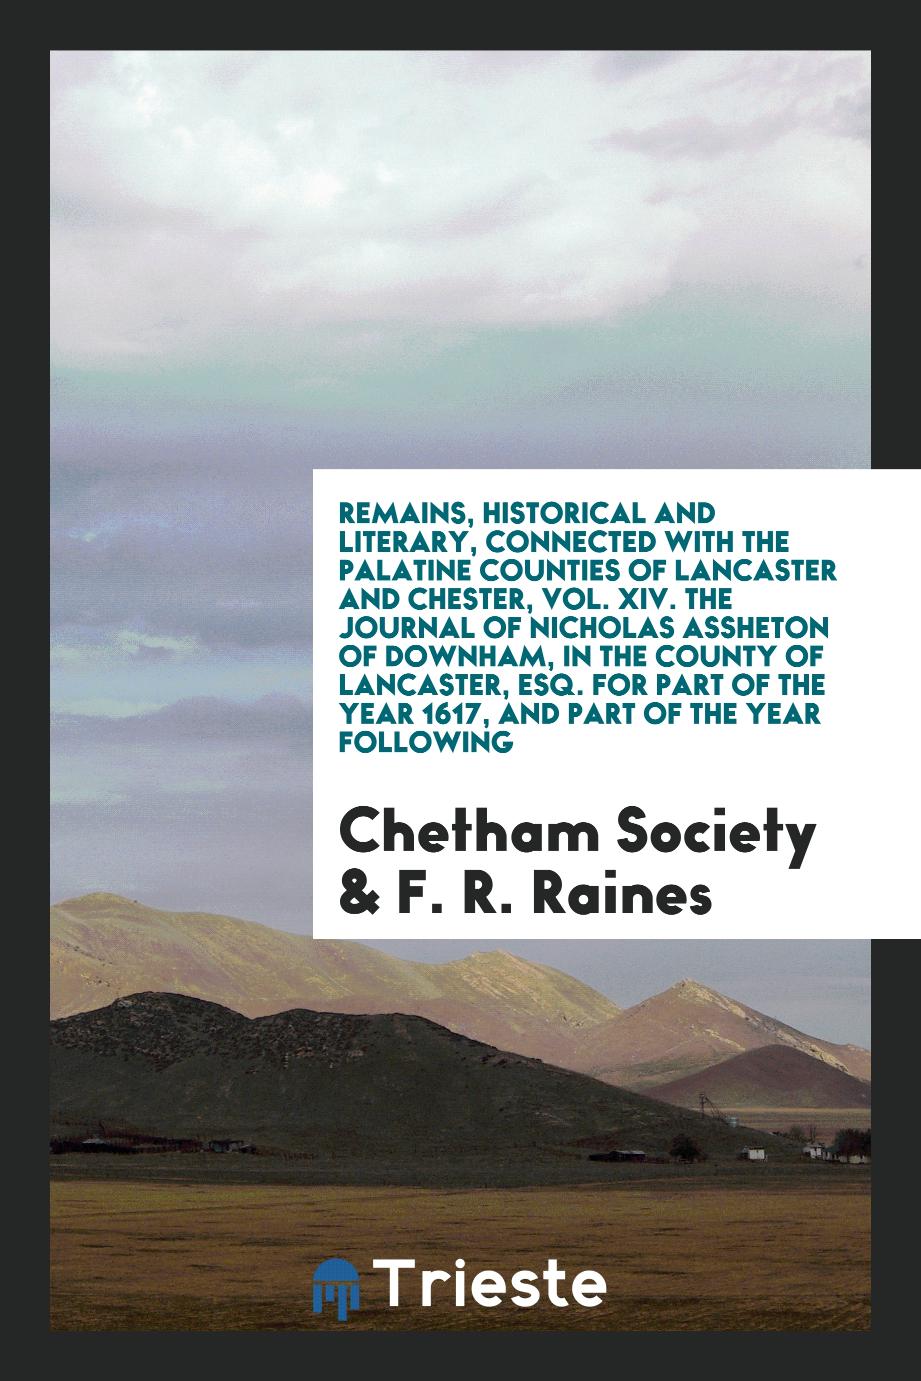 Remains, Historical and Literary, Connected with the Palatine Counties of Lancaster and Chester, Vol. XIV. The Journal of Nicholas Assheton of Downham, in the County of Lancaster, Esq. For Part of the Year 1617, and Part of the Year following